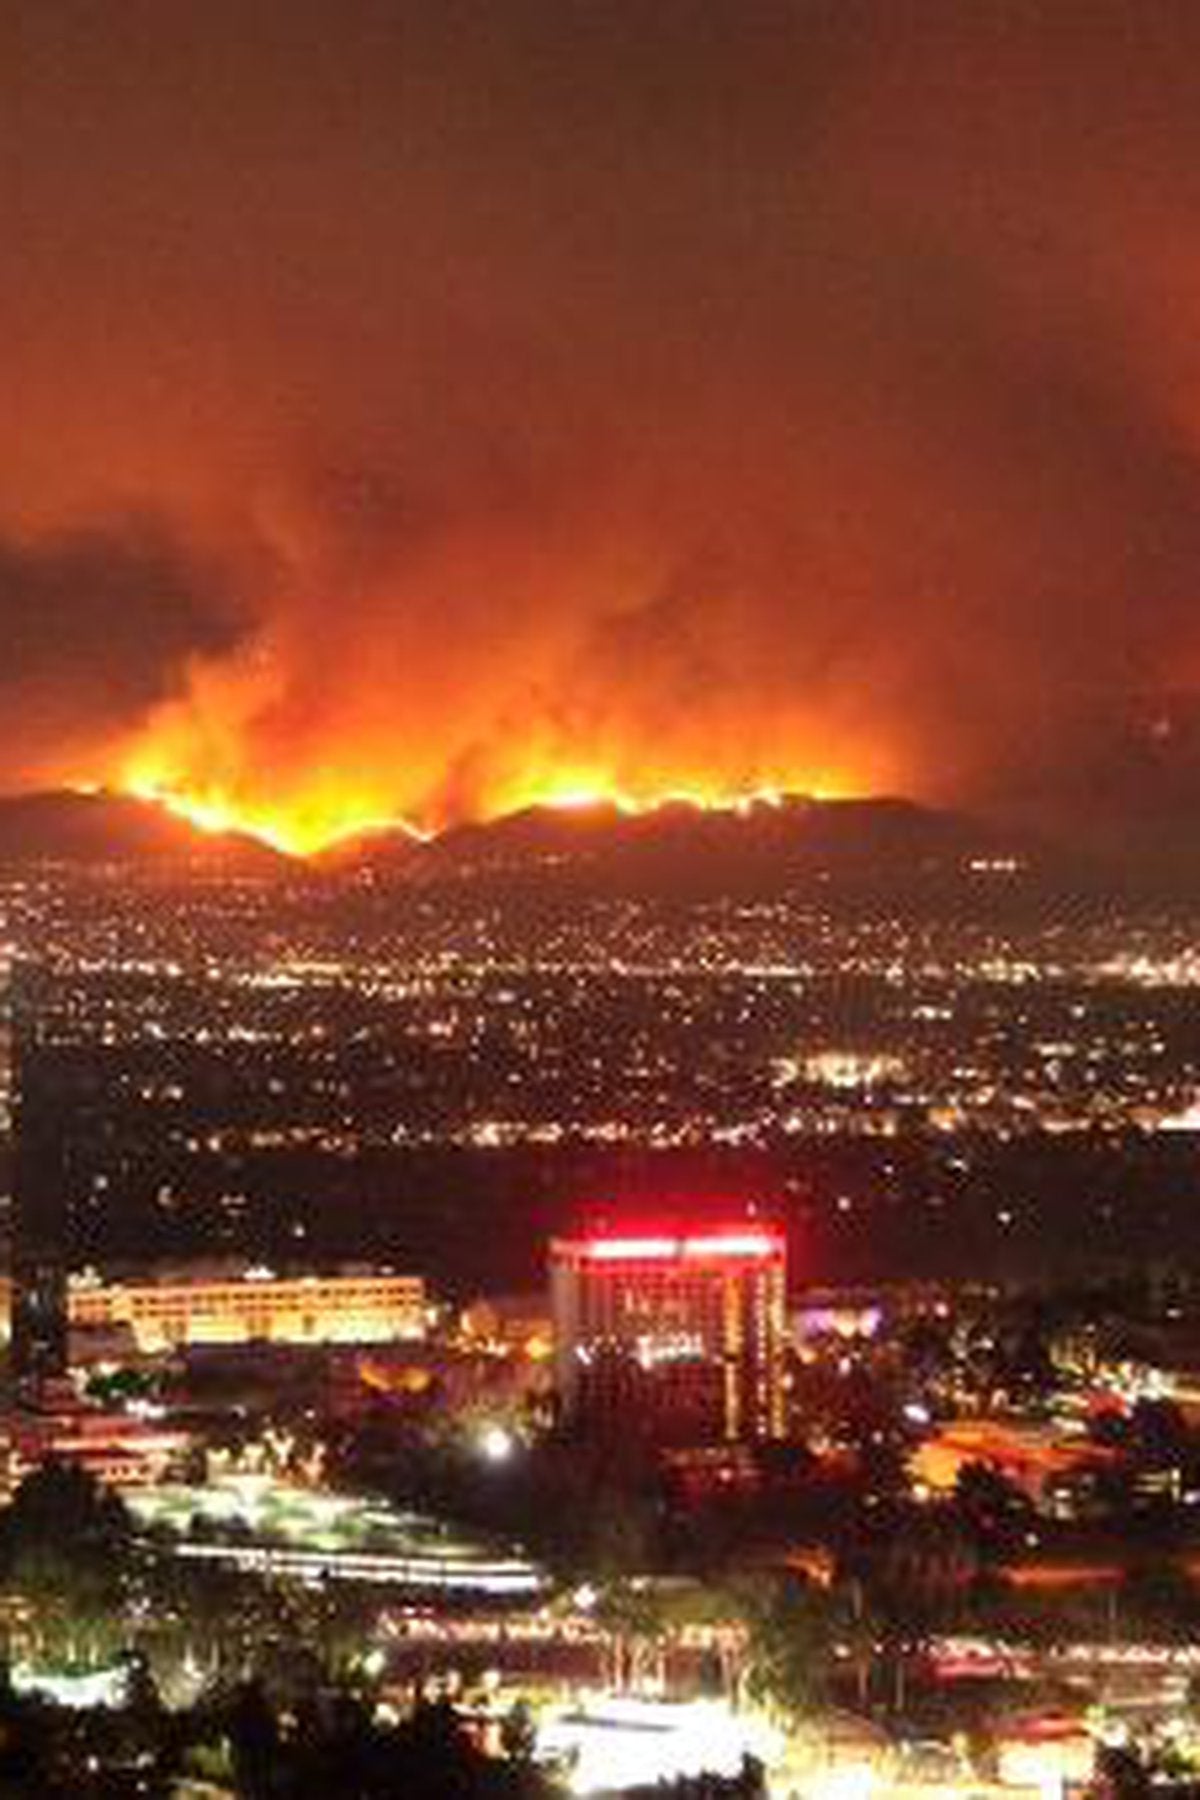 How LA homeowners can protect their valuables in the event of a wildfire.